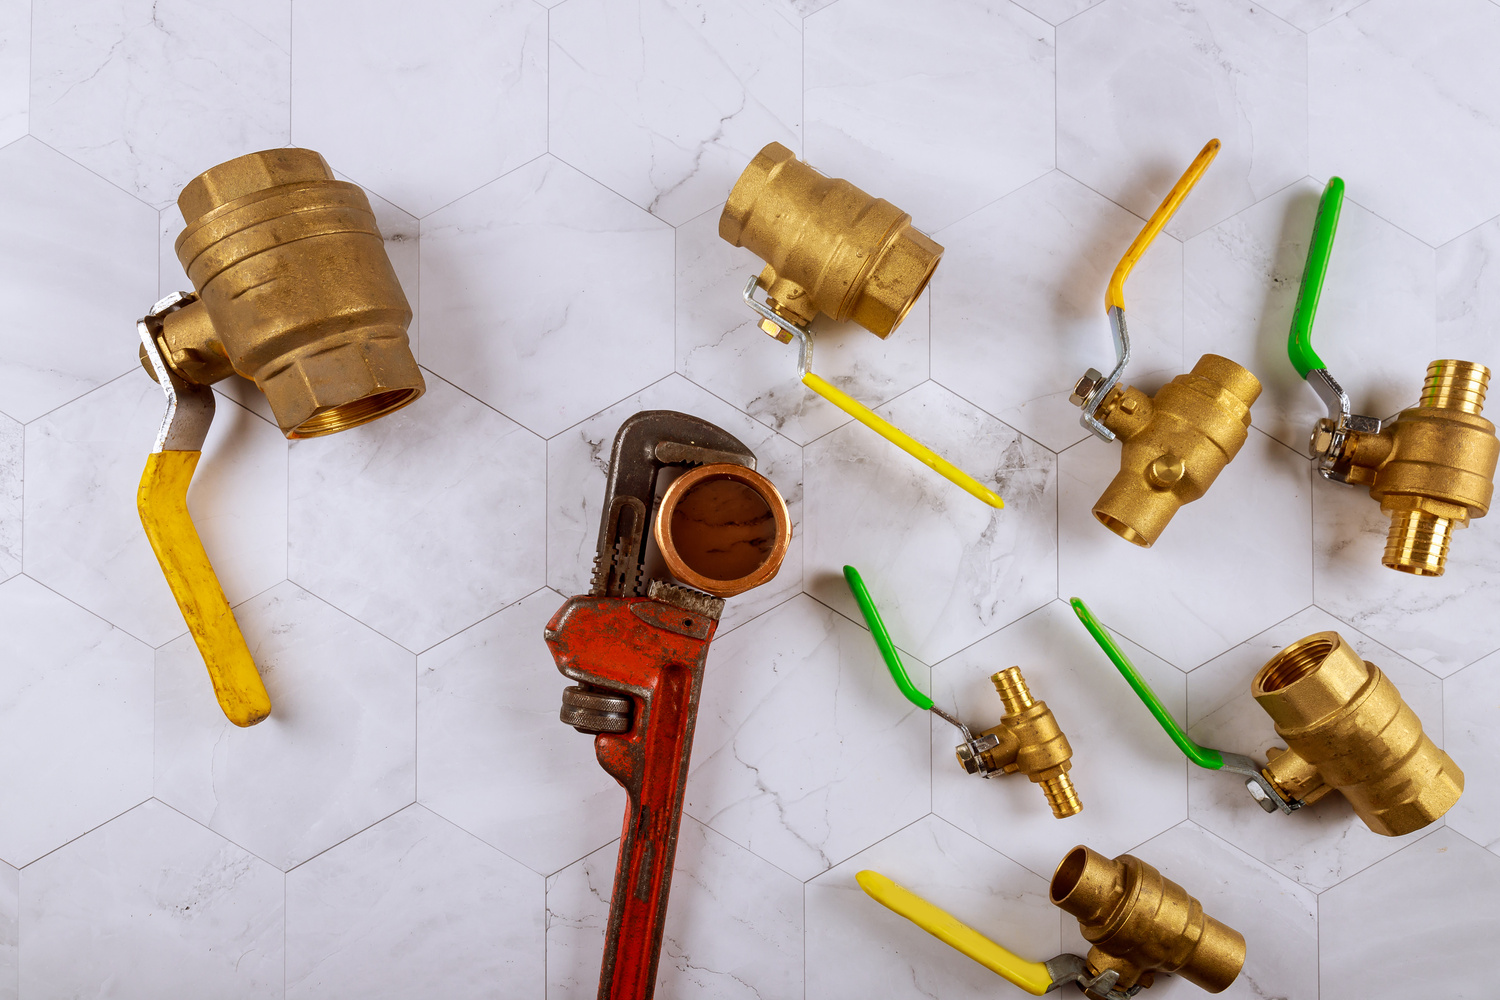 Installation Plumbing Parts Monkey Wrench Construction Brass Plumbing Fittings Gate Valve